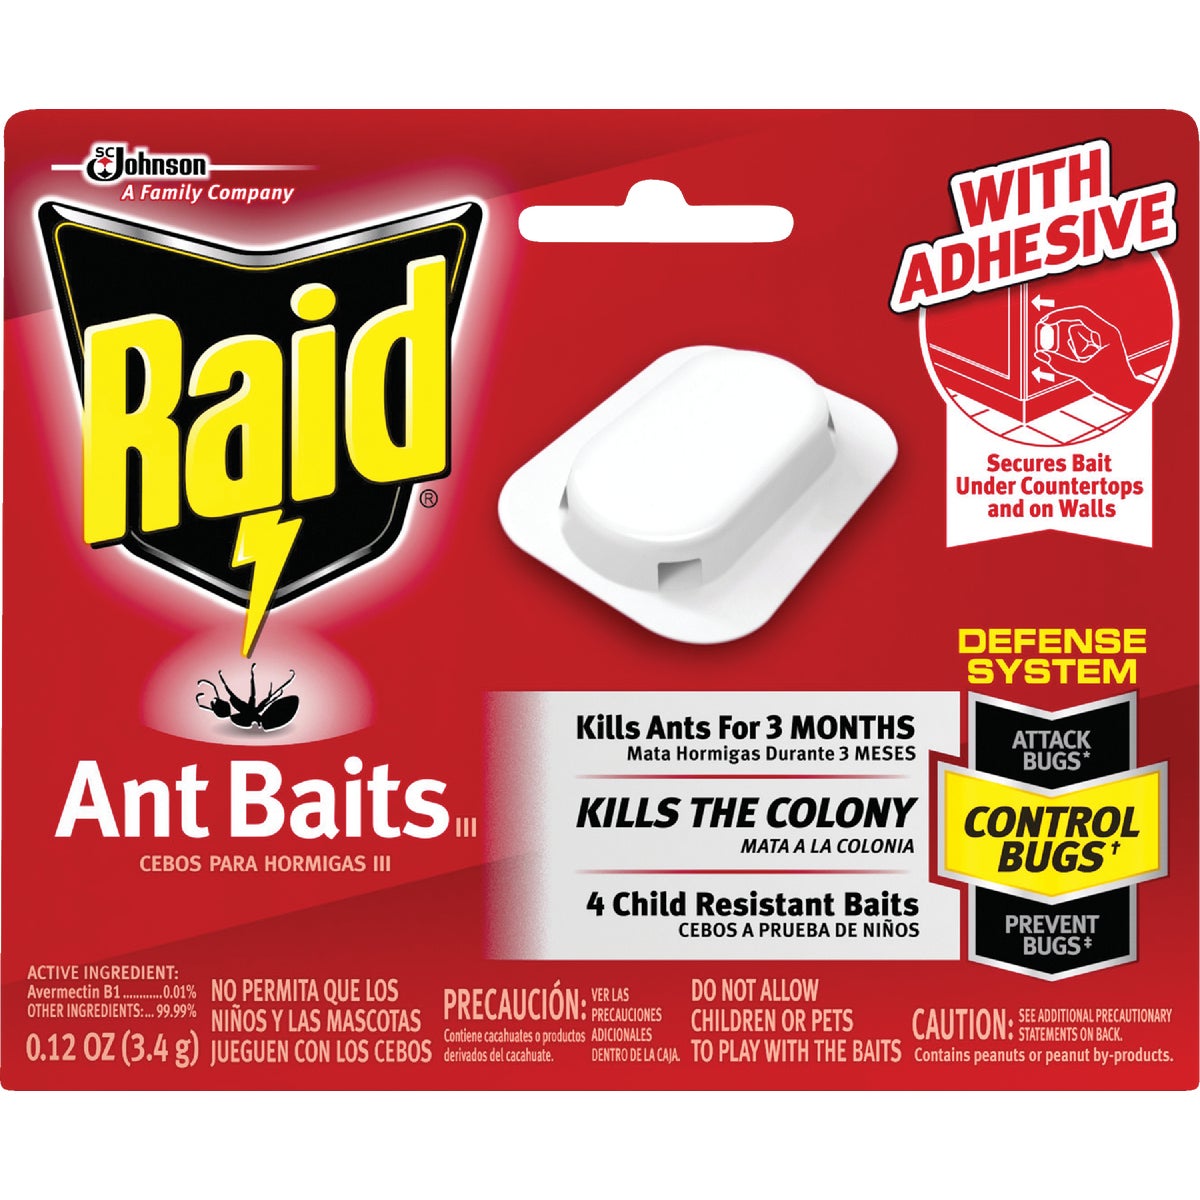 Item 756300, Raid ant baits kill a variety of household ants including carpenter ants, 